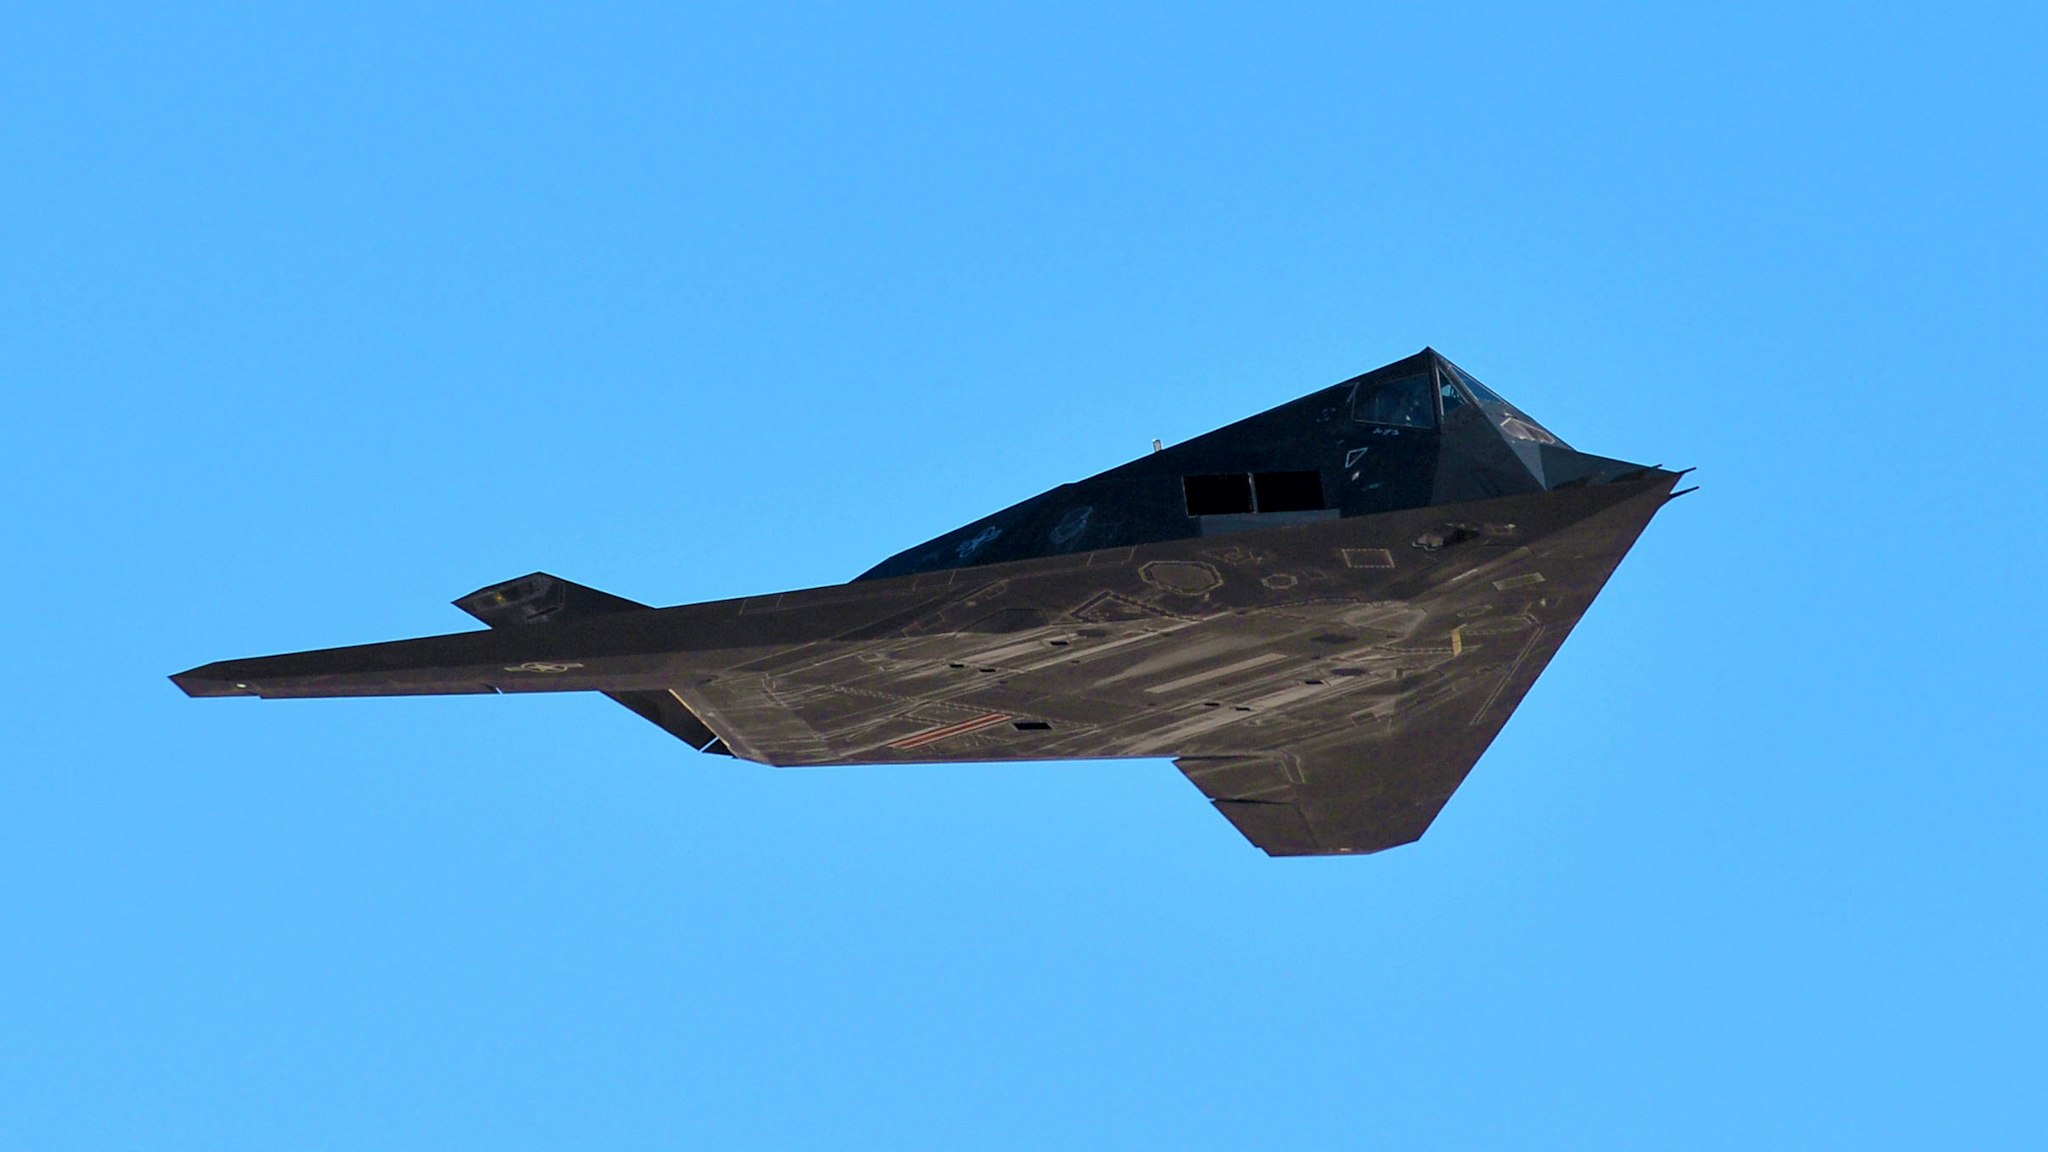 DEATH VALLEY, CALIFORNIA - FEBRUARY 27: The F-117 Nighthawk Stealth Fighter flies on February 27, 2019 in Death Valley, California.